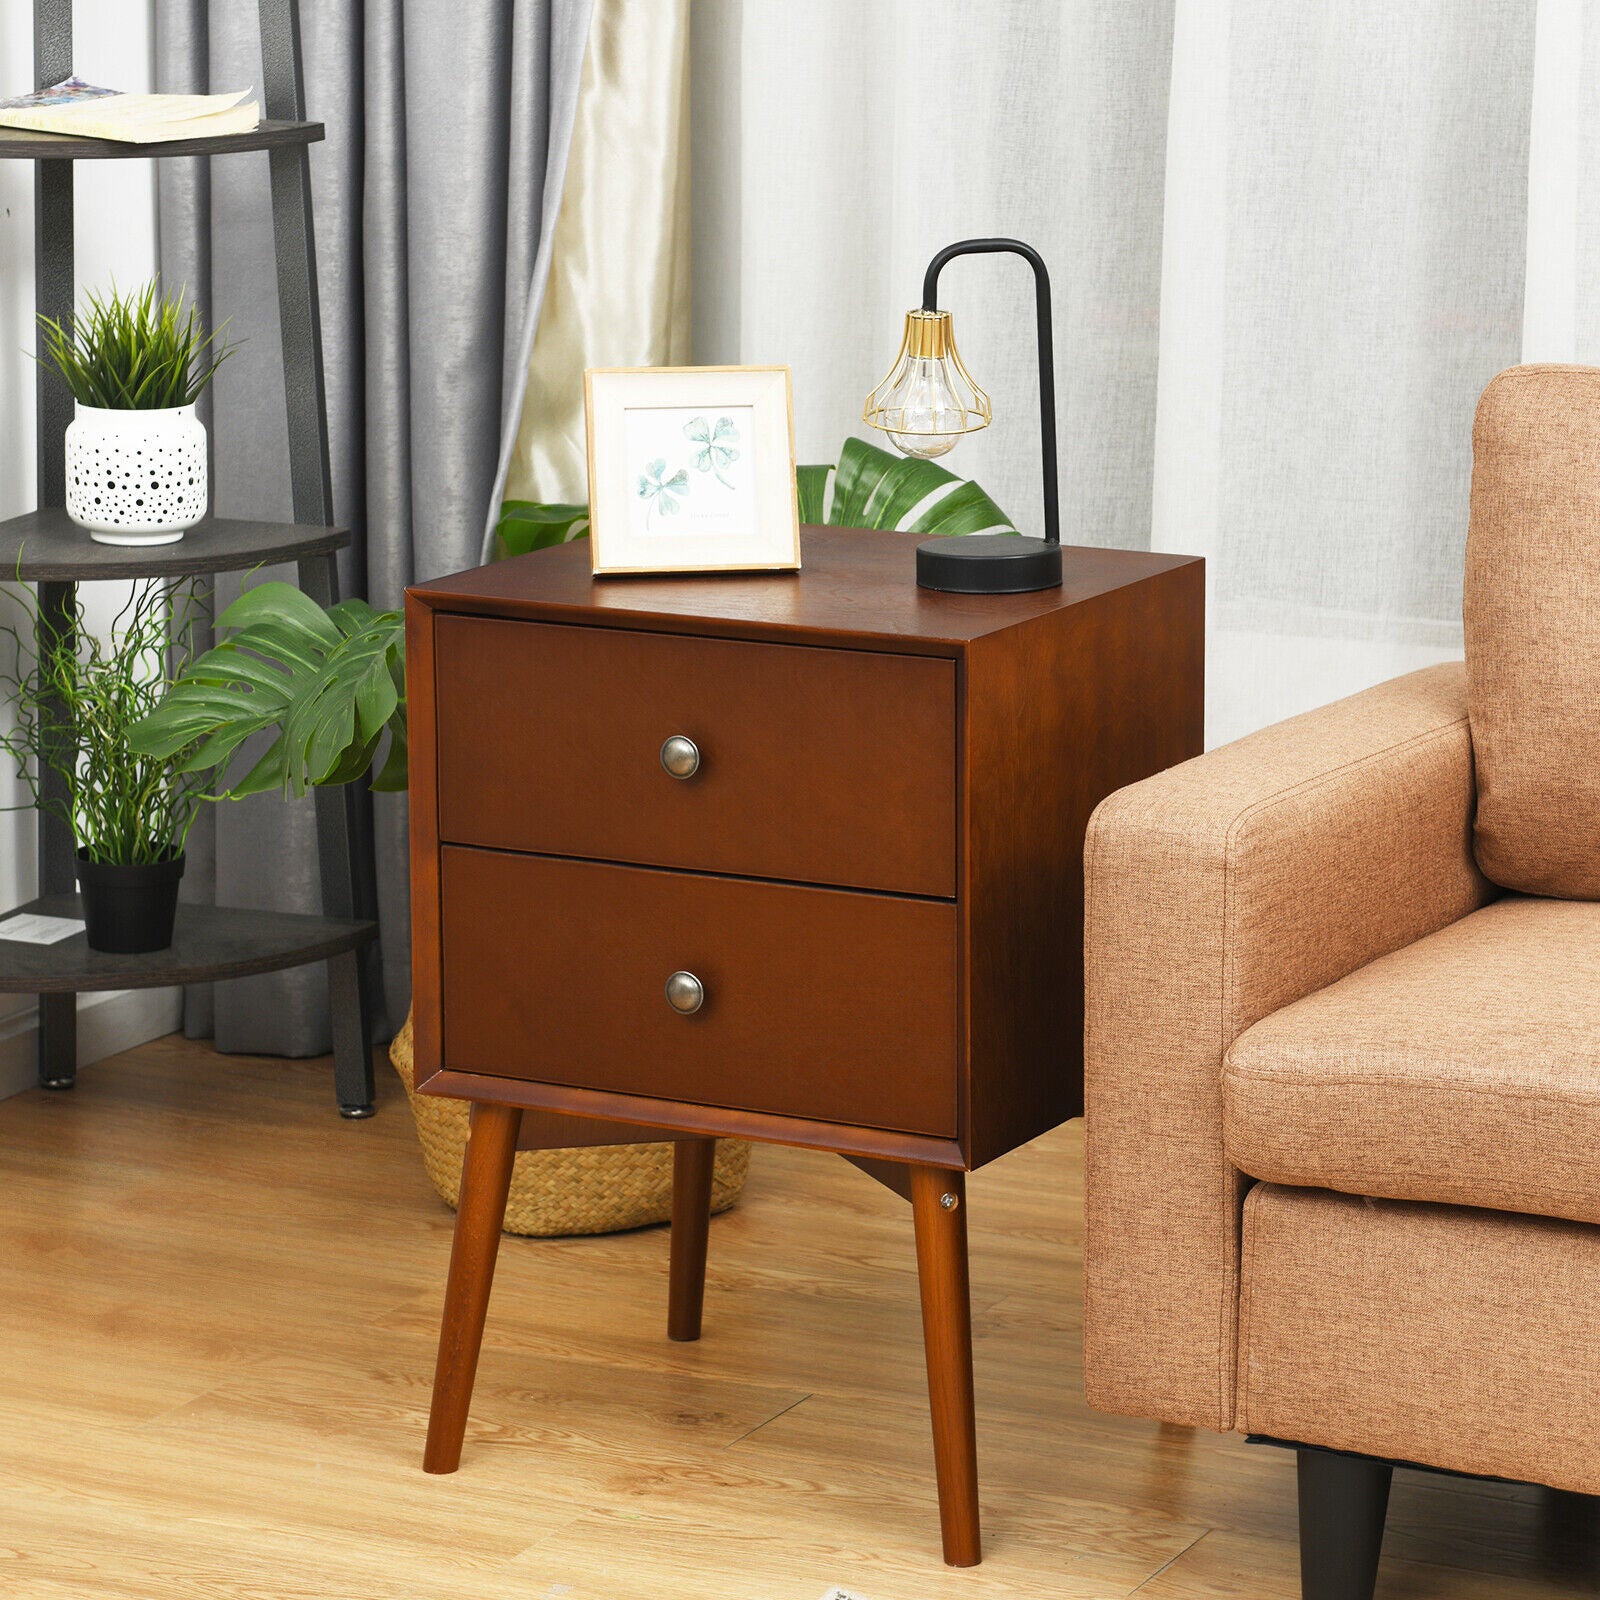 End Table - Mid Century Style Side Table With 2 Drawers